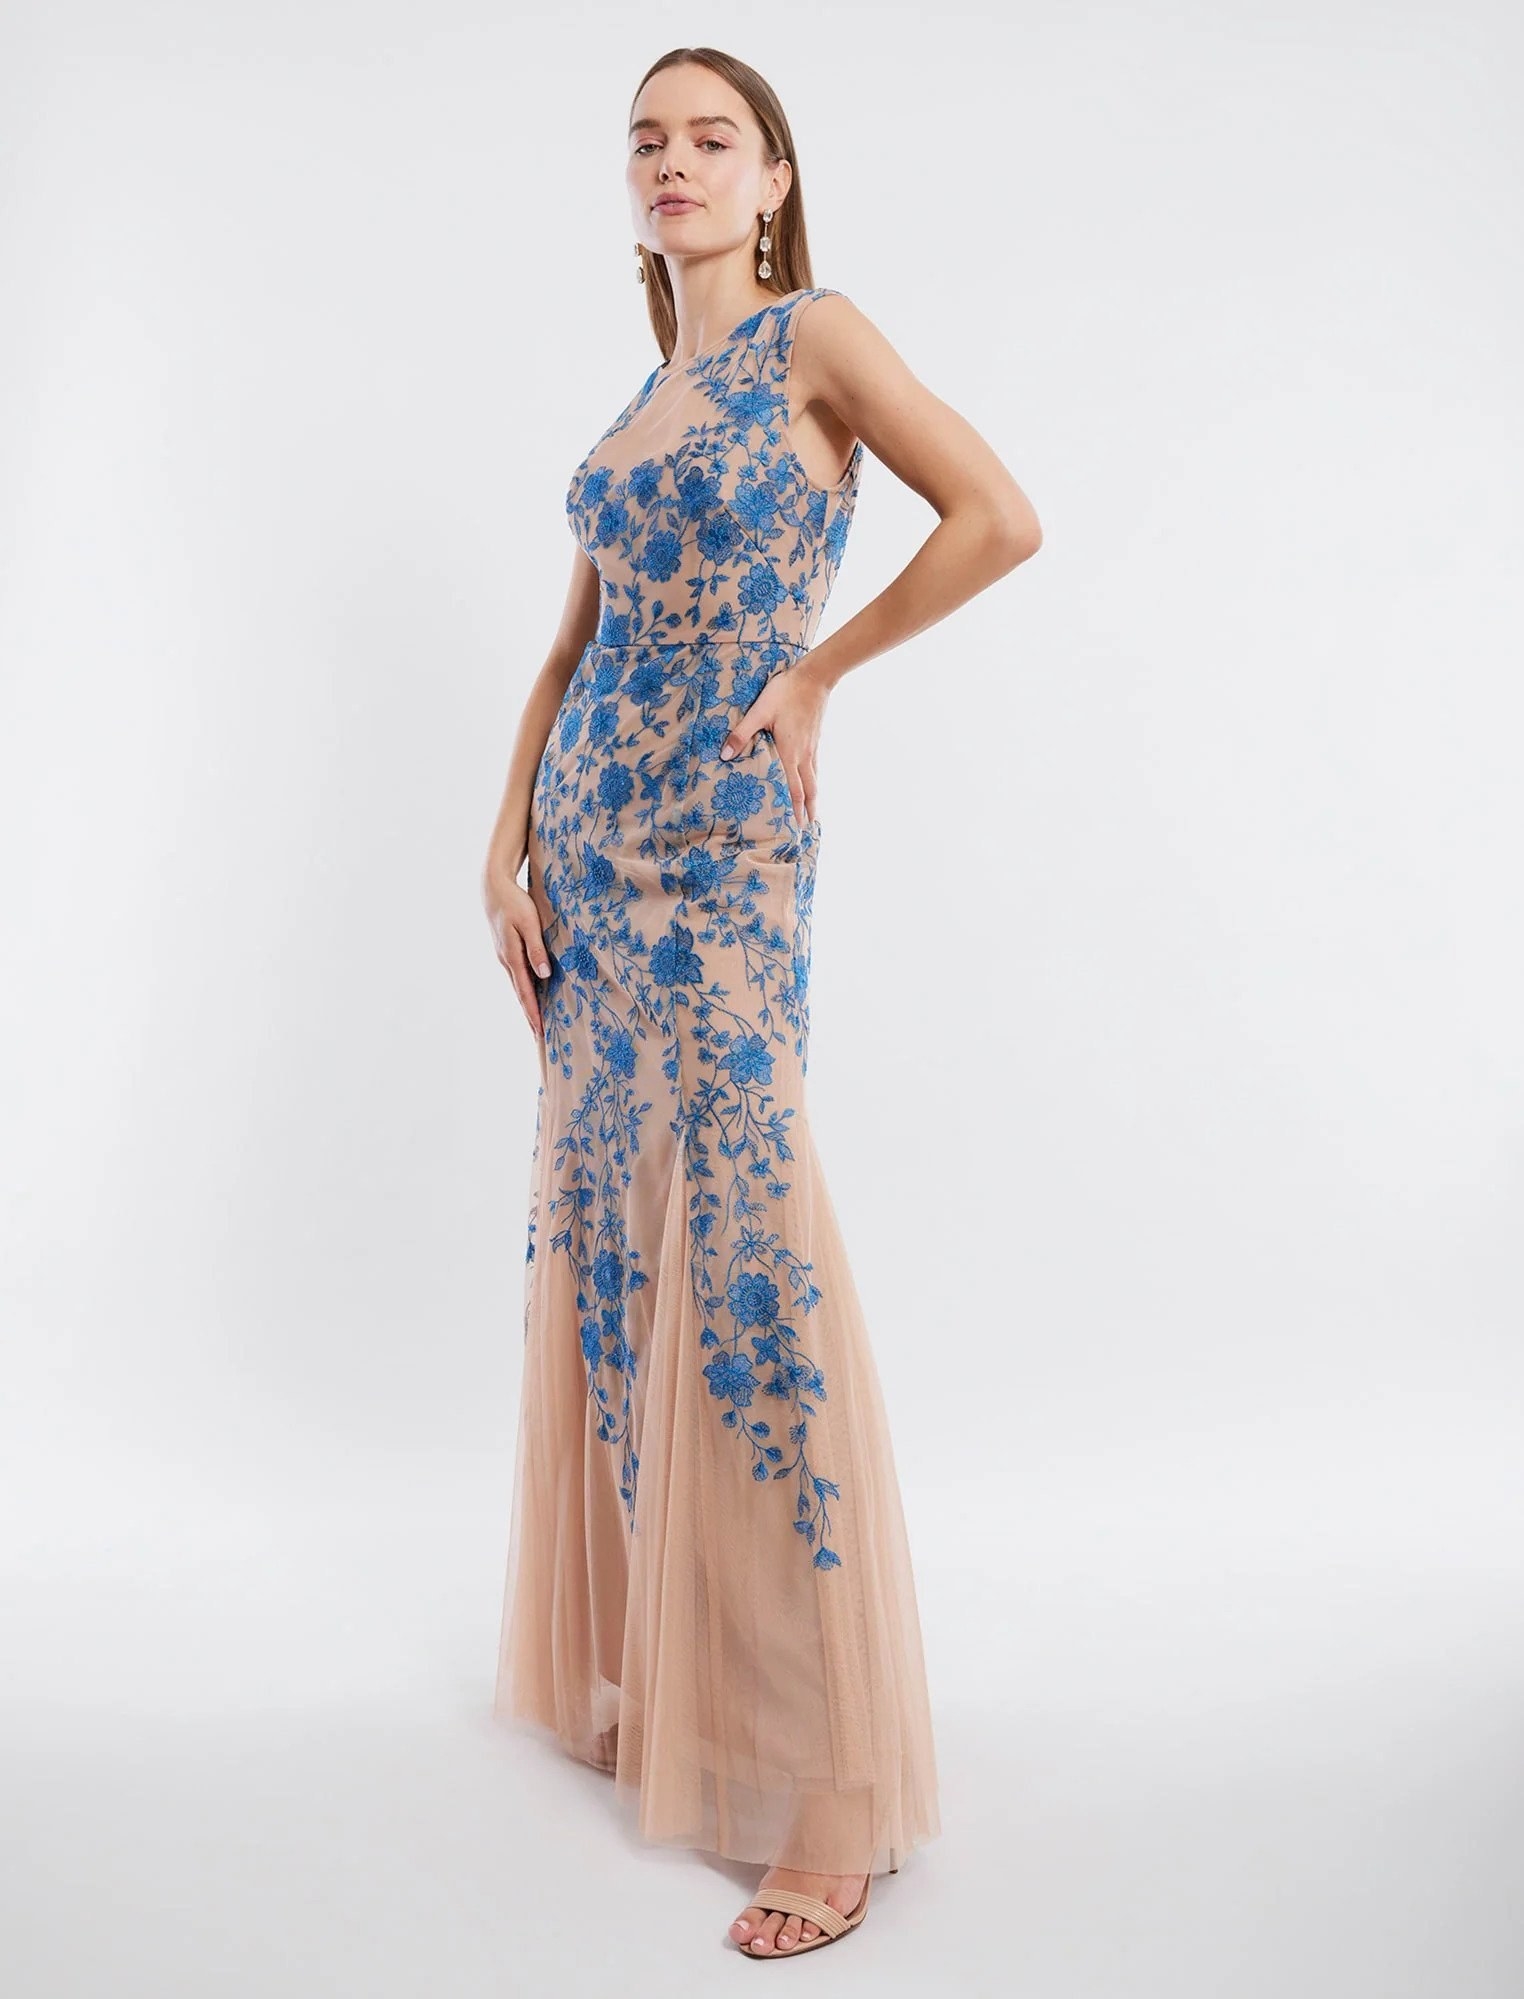 blue and tan sheer floral lace evening gown